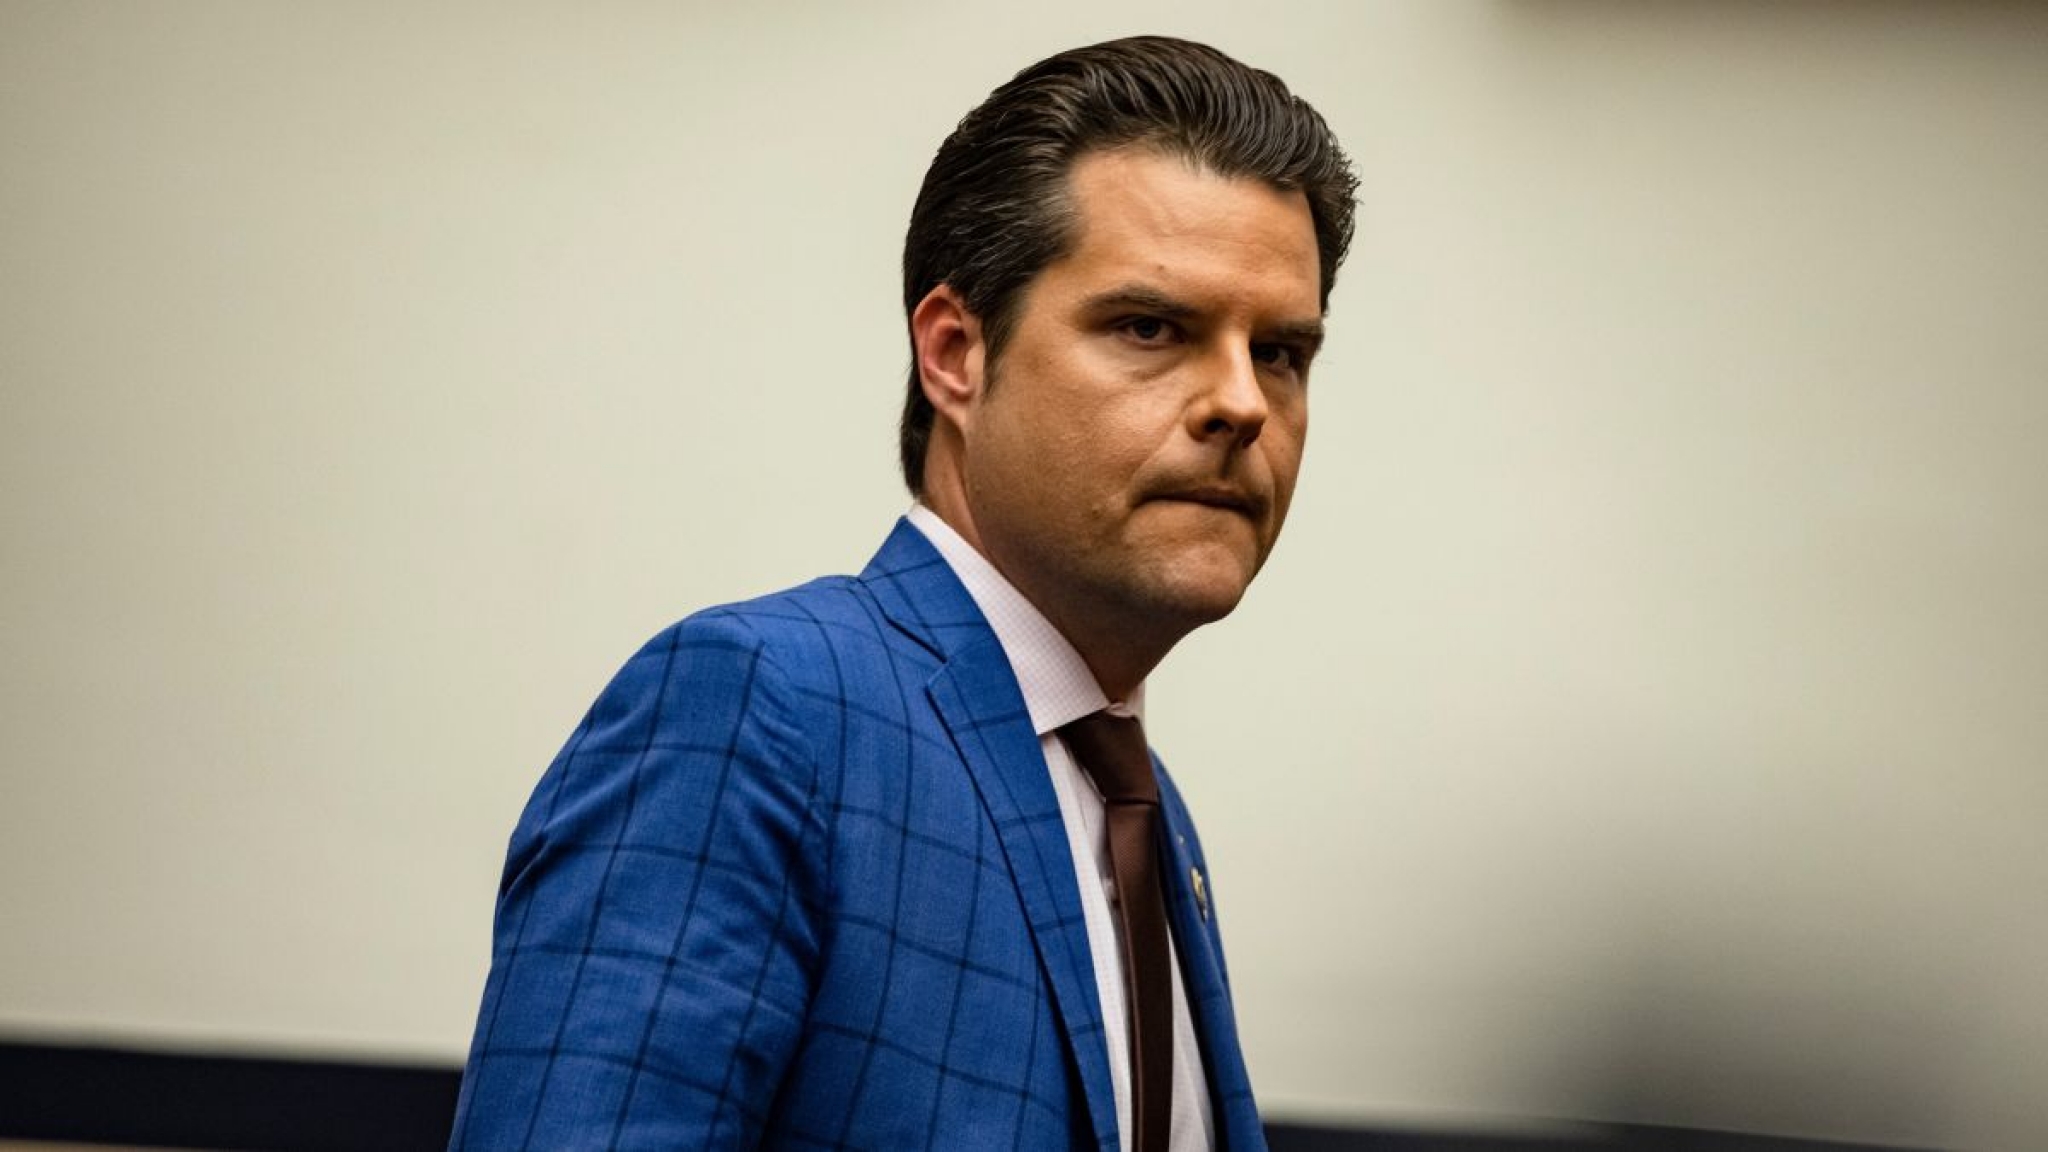 These Text Message Receipts Reportedly Led Feds to Rep. Matt Gaetz